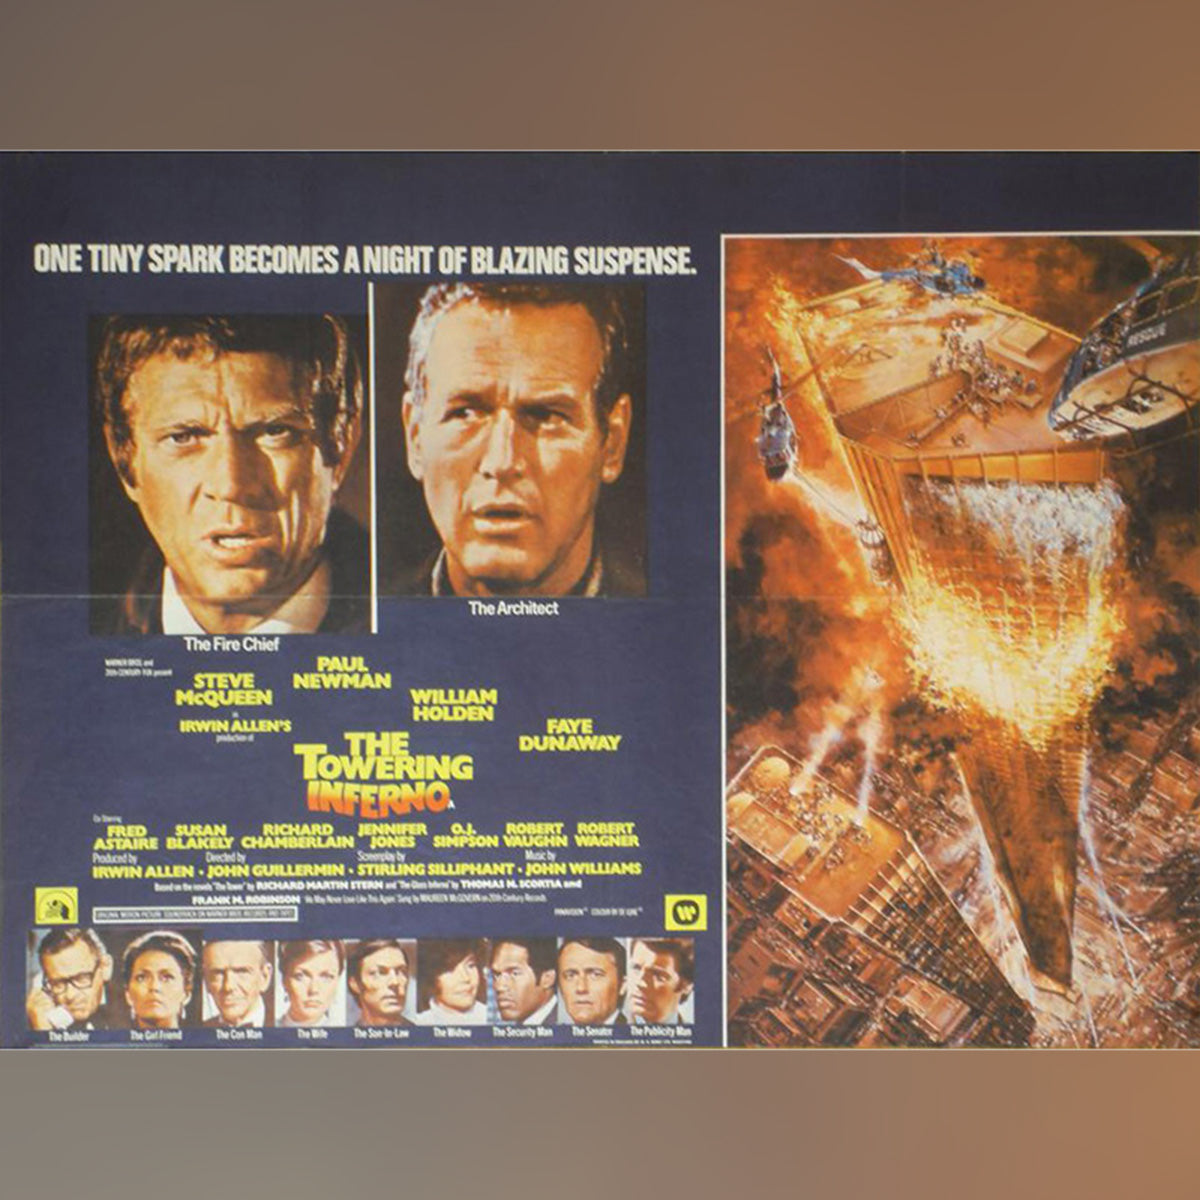 Original Movie Poster of Towering Inferno, The (1974)